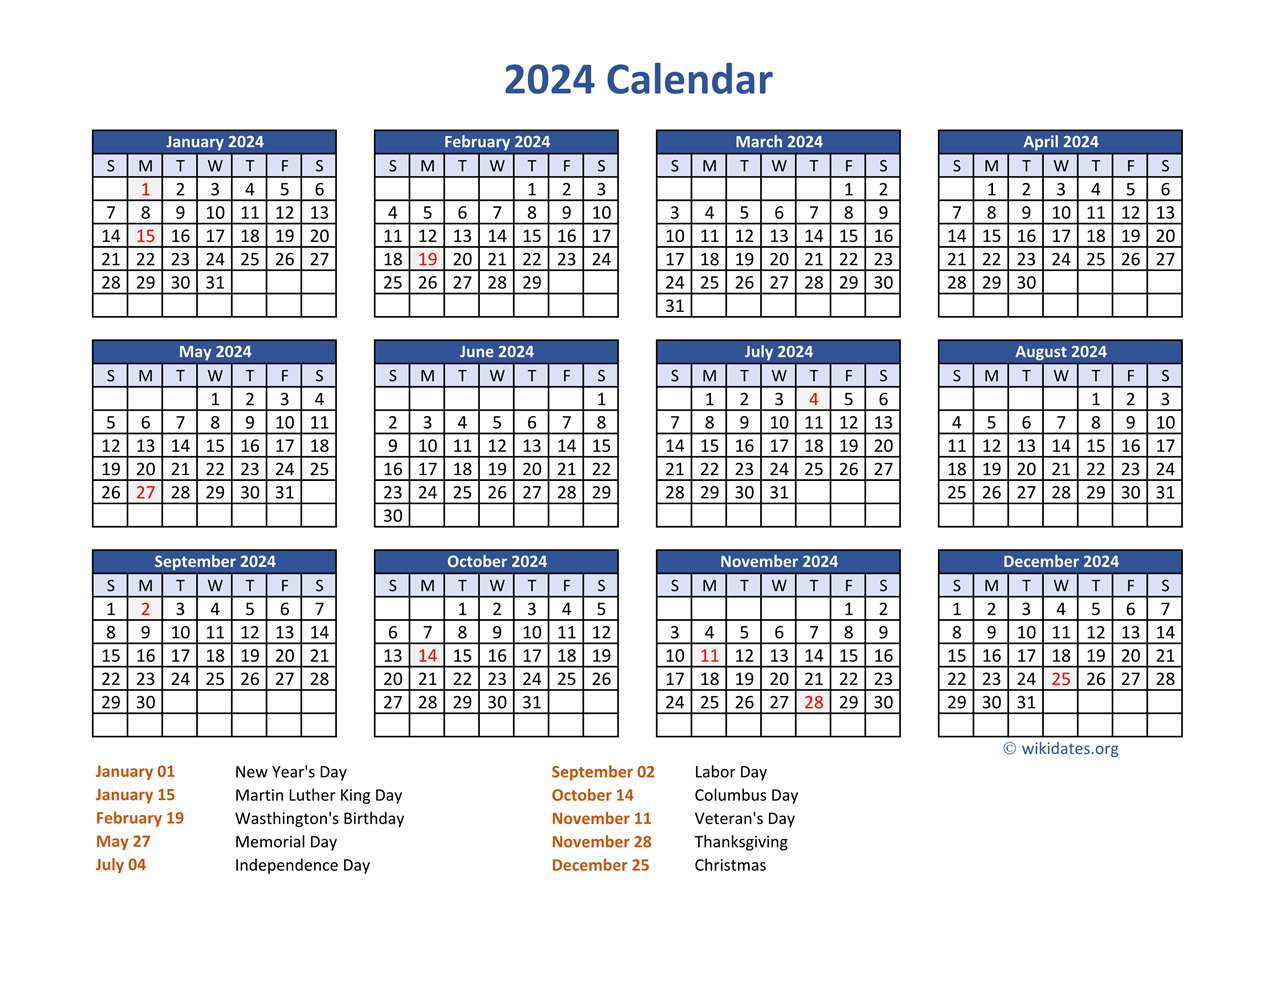 Pdf Calendar 2024 With Federal Holidays | Wikidates for Free Printable Calendar With Holidays 2024